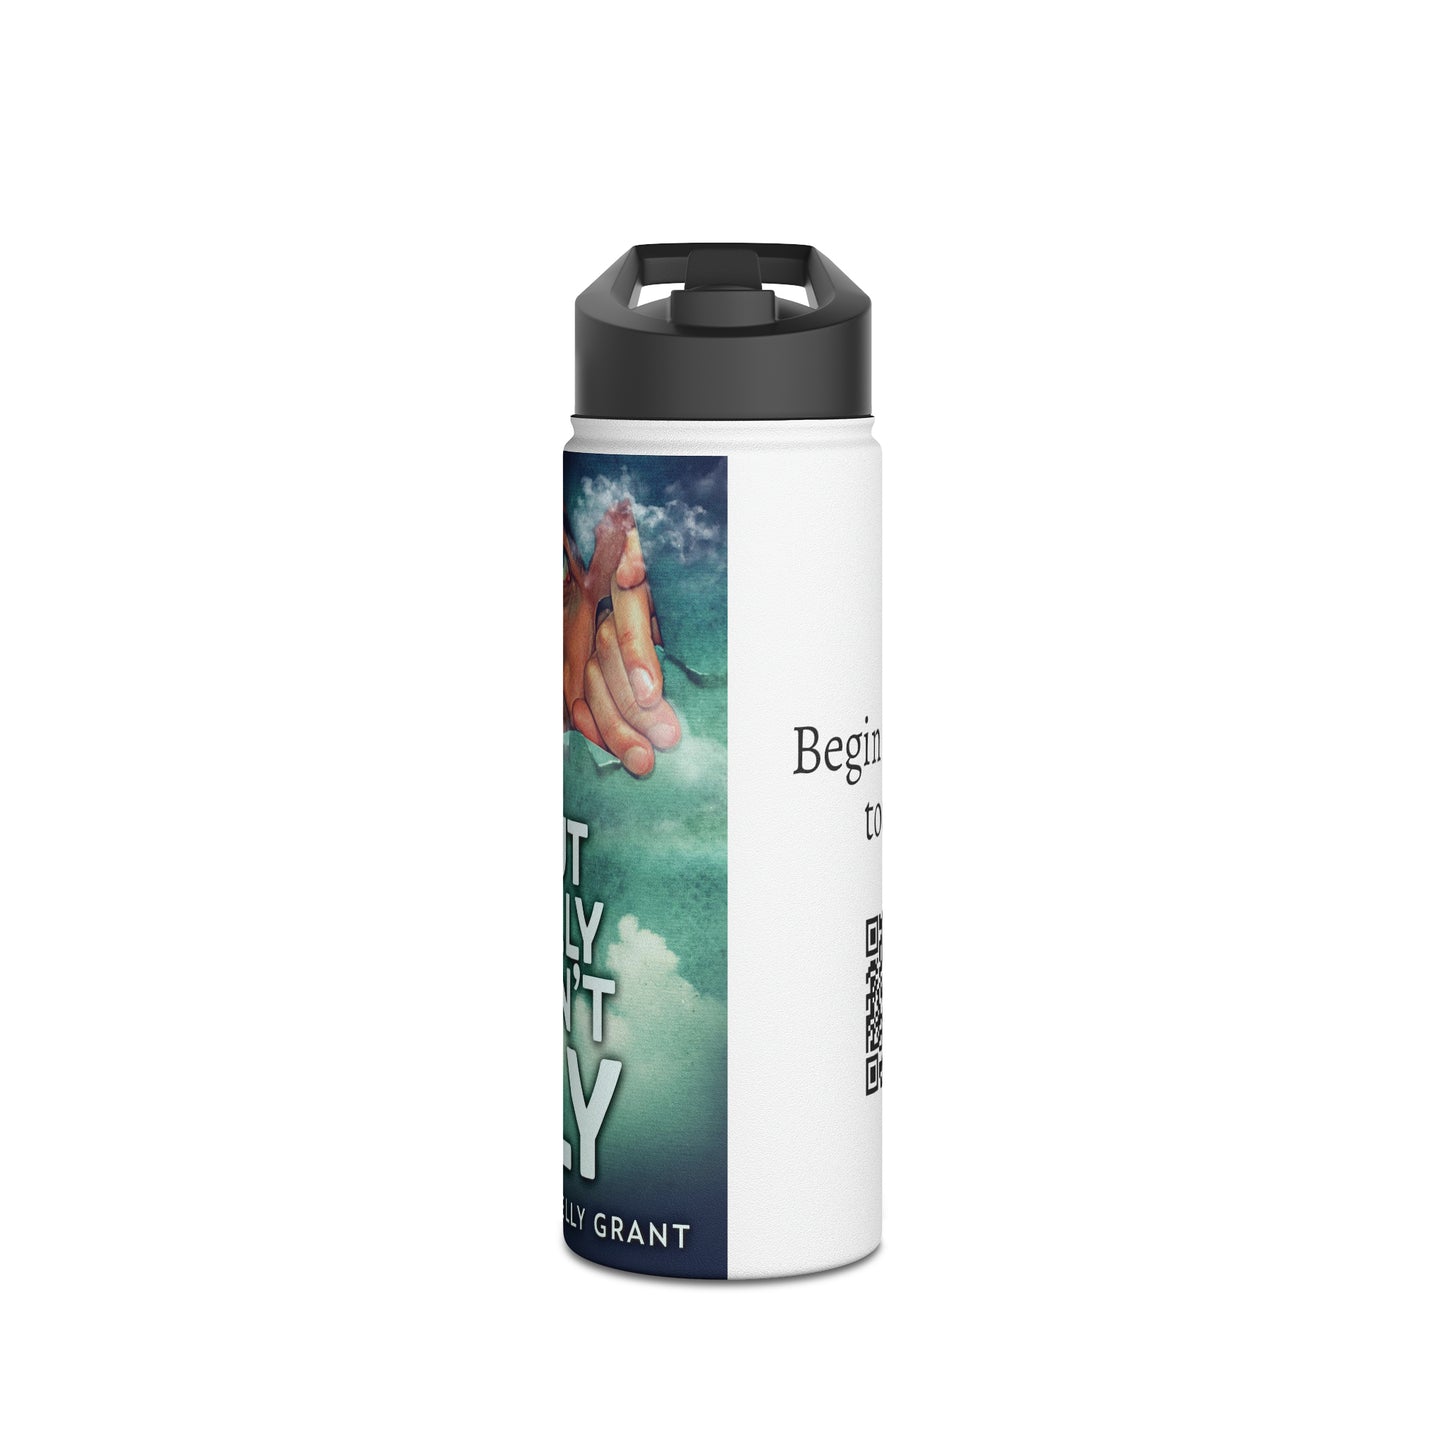 But Billy Can't Fly - Stainless Steel Water Bottle